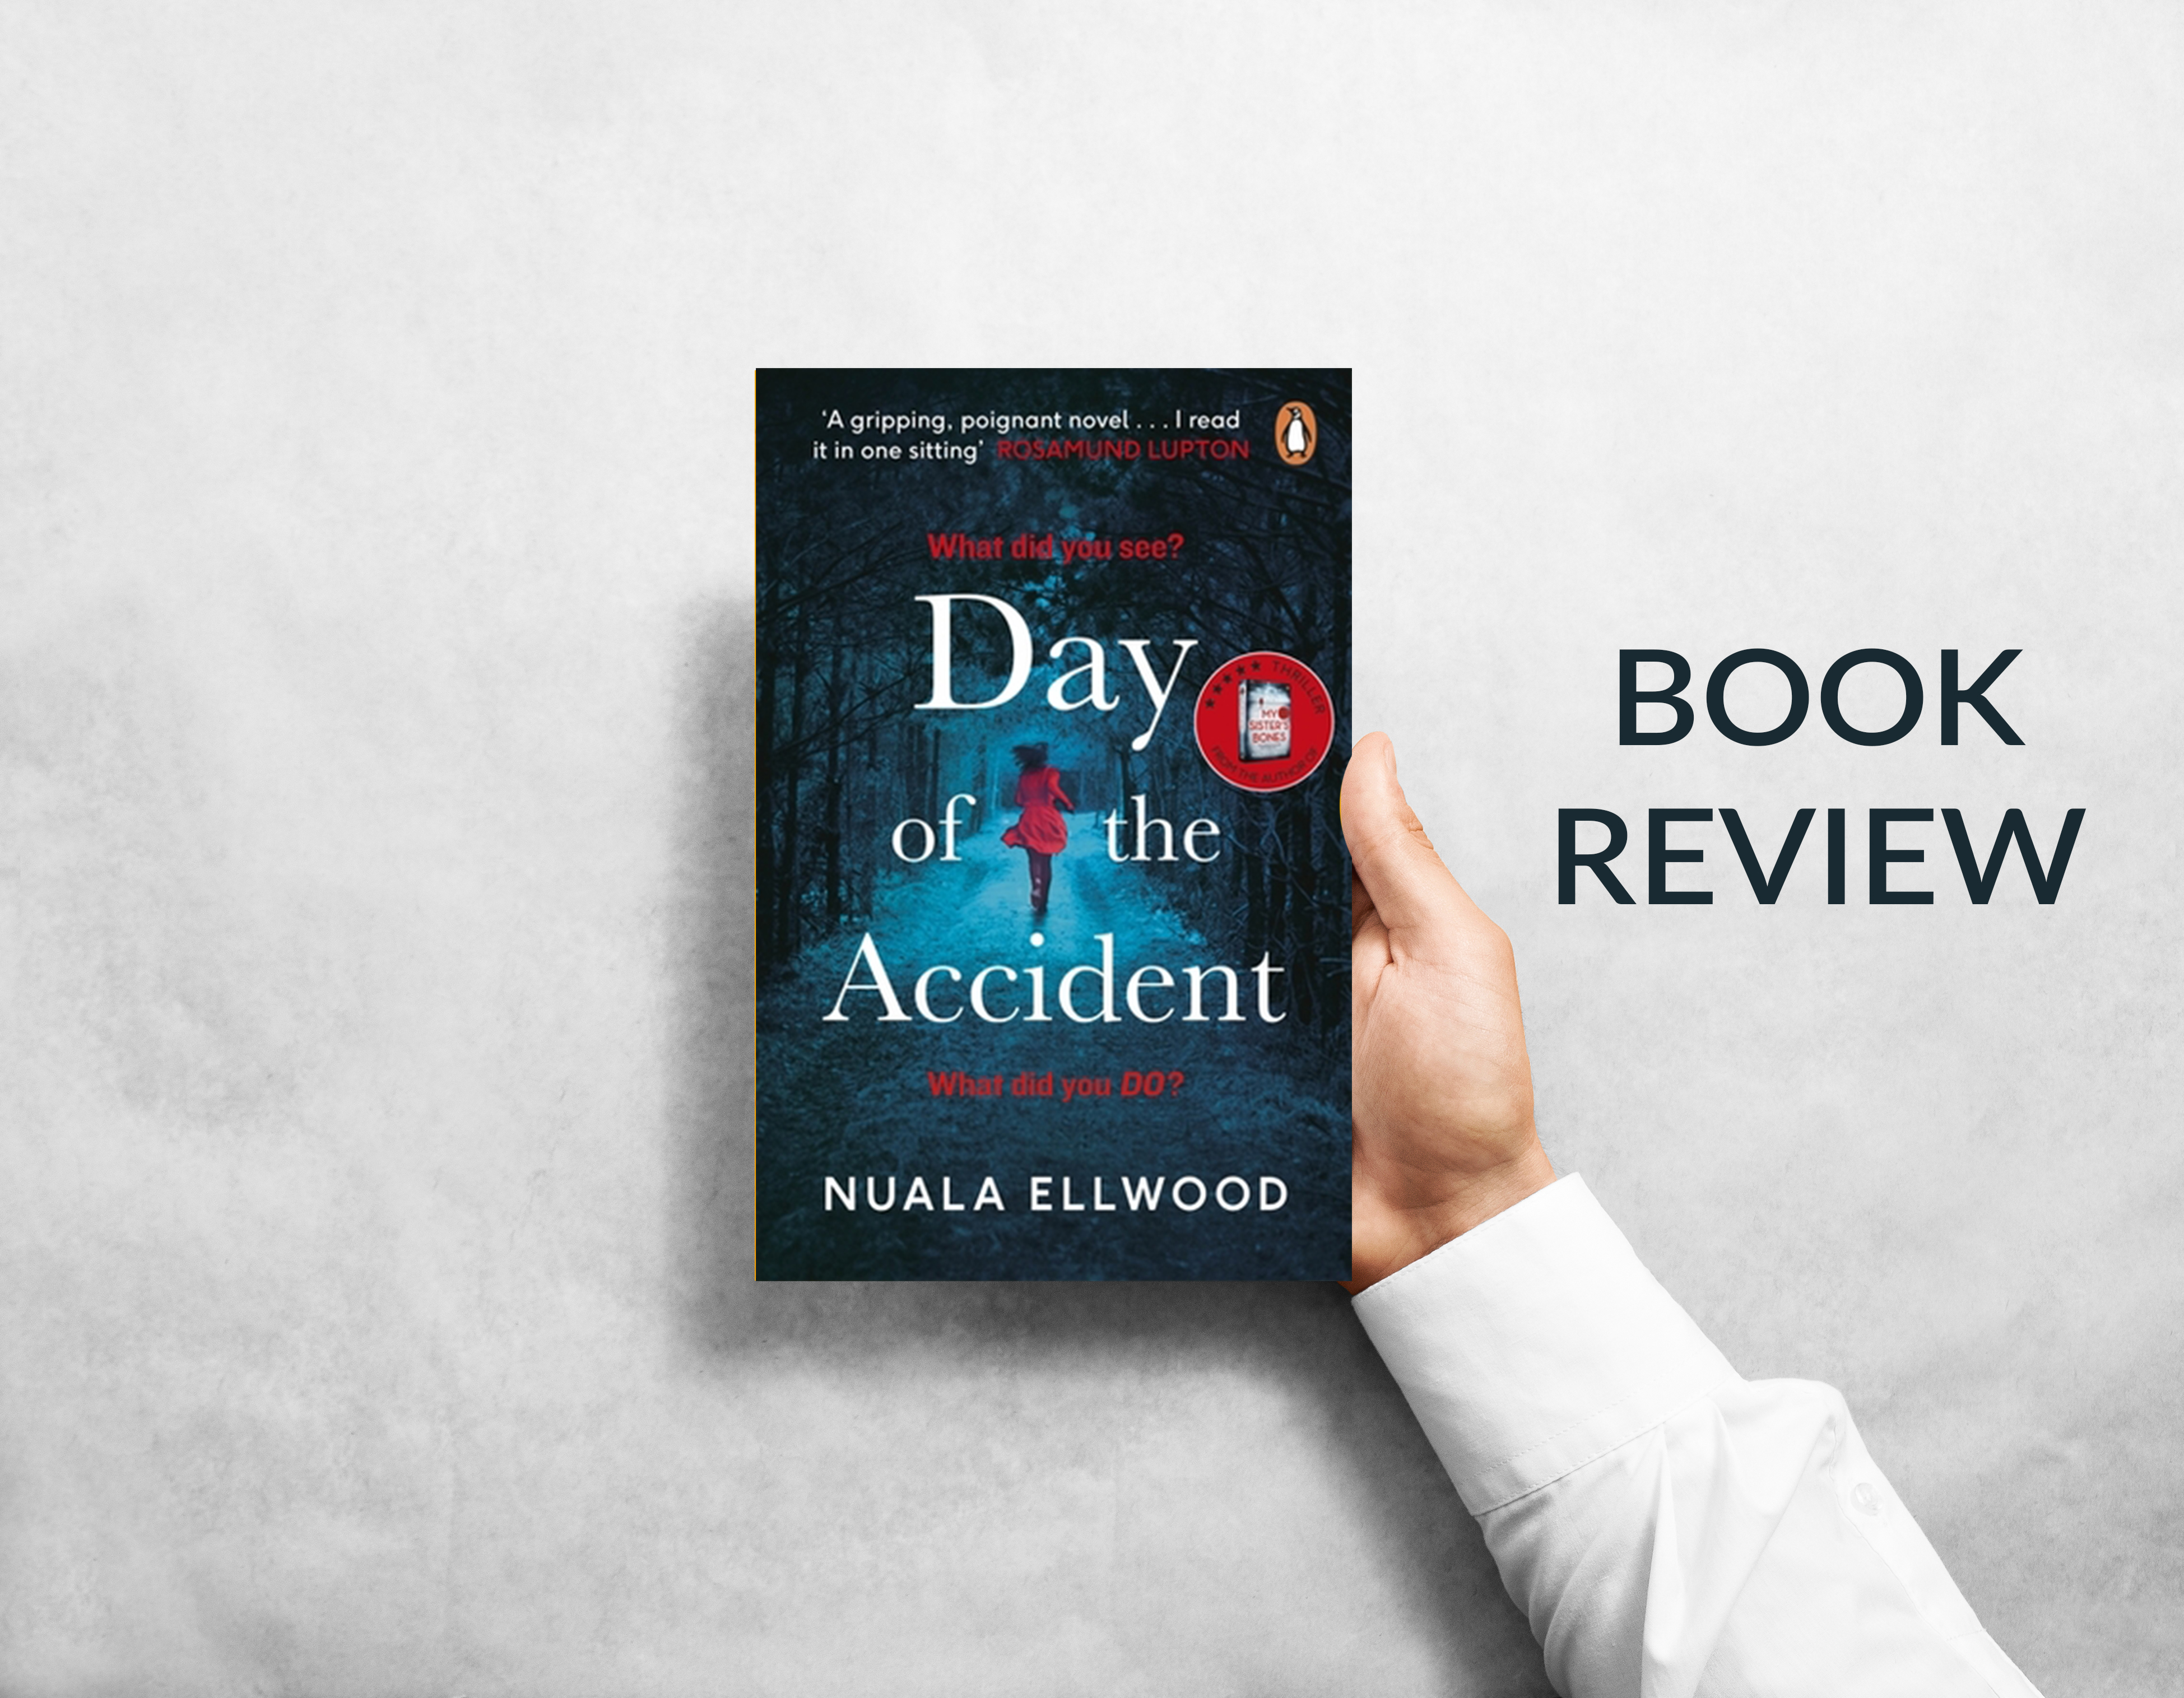 Day of the Accident by Nuala Ellwood – Book Review